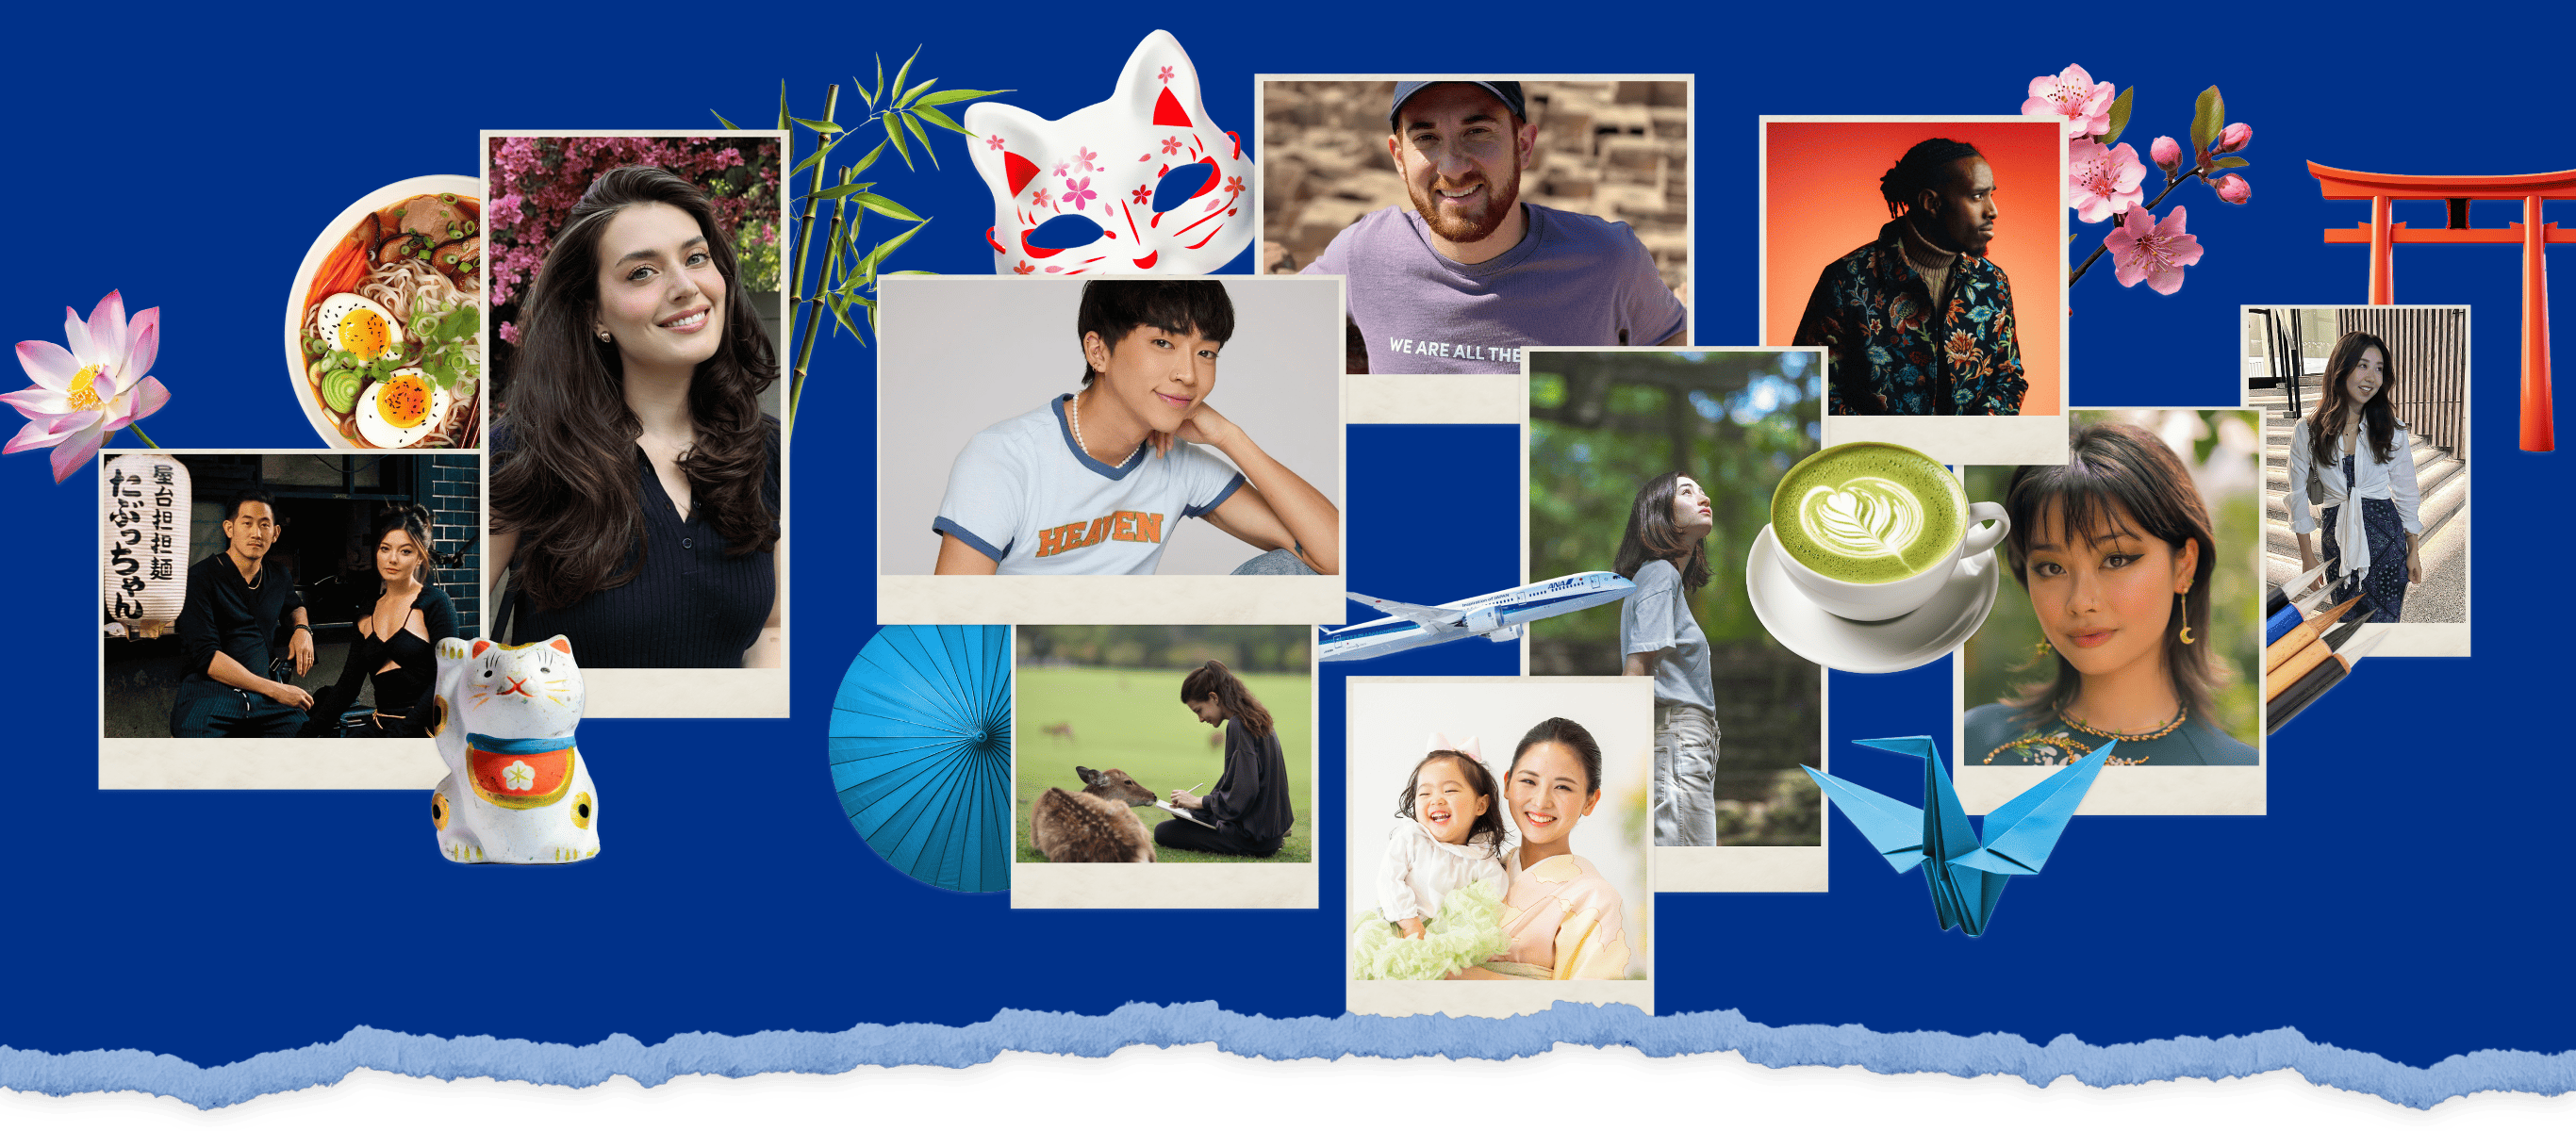 A personalized trip collage featuring people of different genders and ethnicities, cultural elements like a torii gate and maneki-neko, and lifestyle scenes including a matcha latte, an ANA airplane and origami.